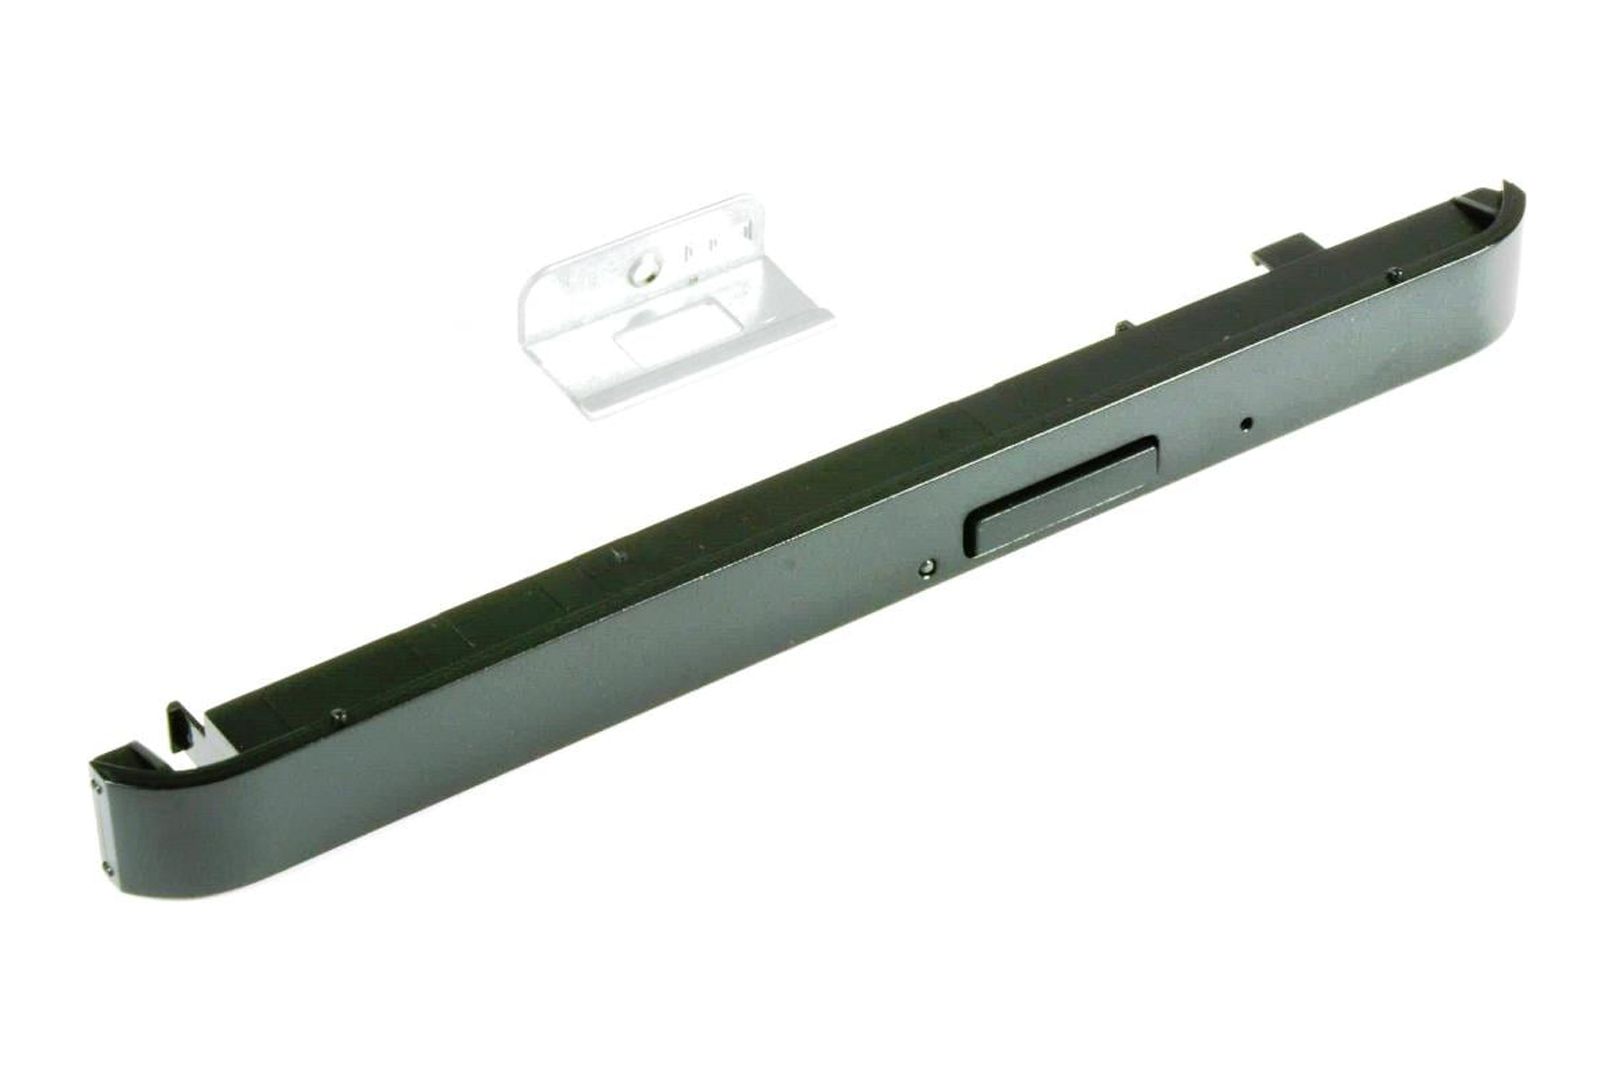 Dell Alienware Aurora R5 R6 R7 Optical Drive Bezel & Hook Assembly 8R0PF Black - image 1 of 2